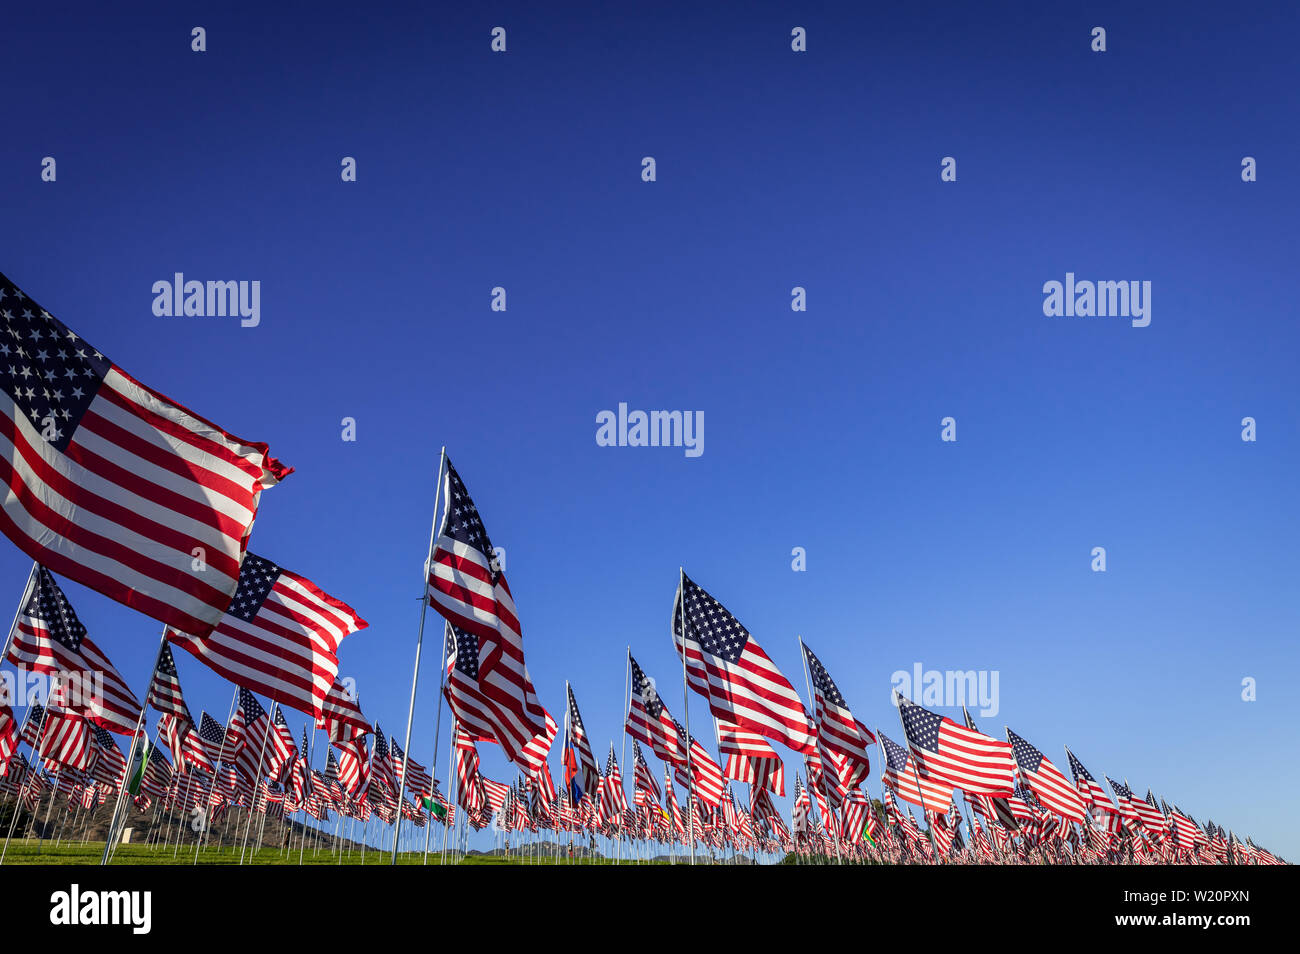 A large group of American flags. Veterans or Memorial day display Stock Photo